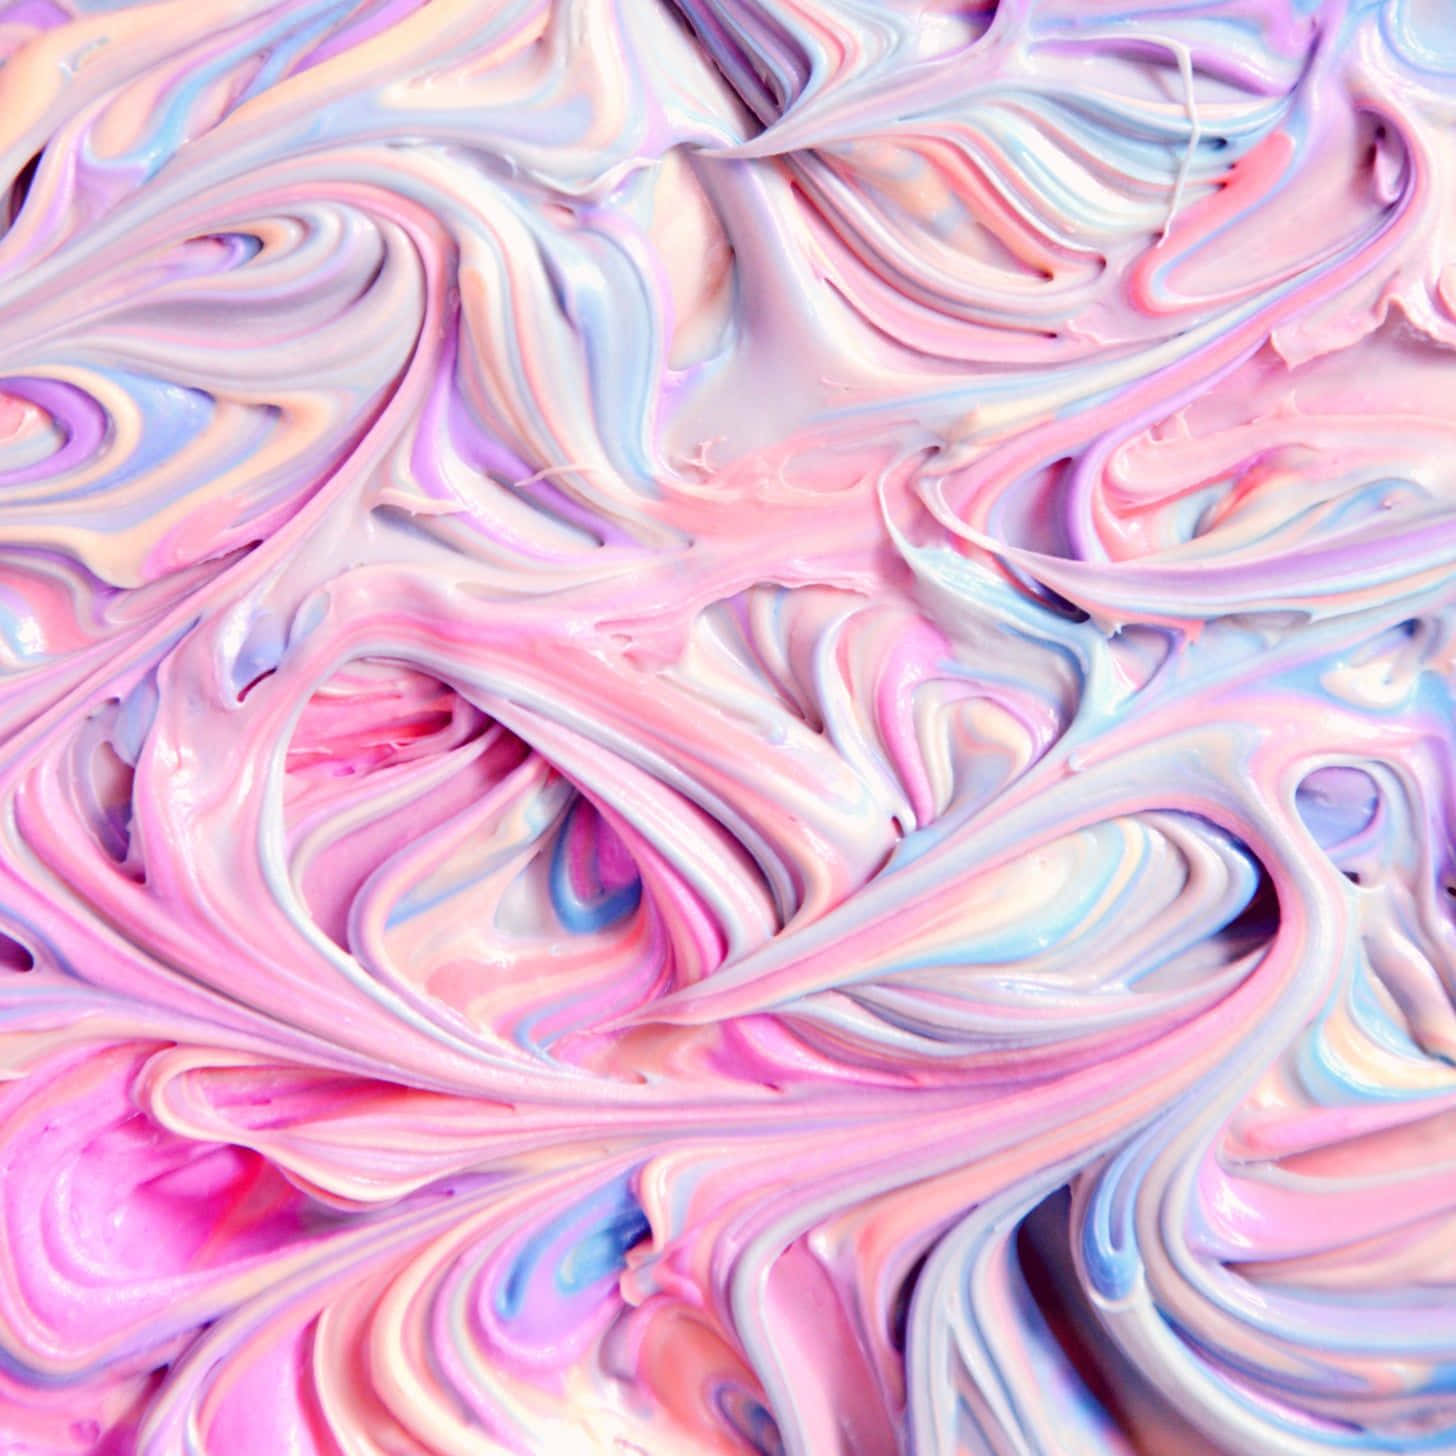 A Close Up Of A Pink And Blue Swirled Liquid